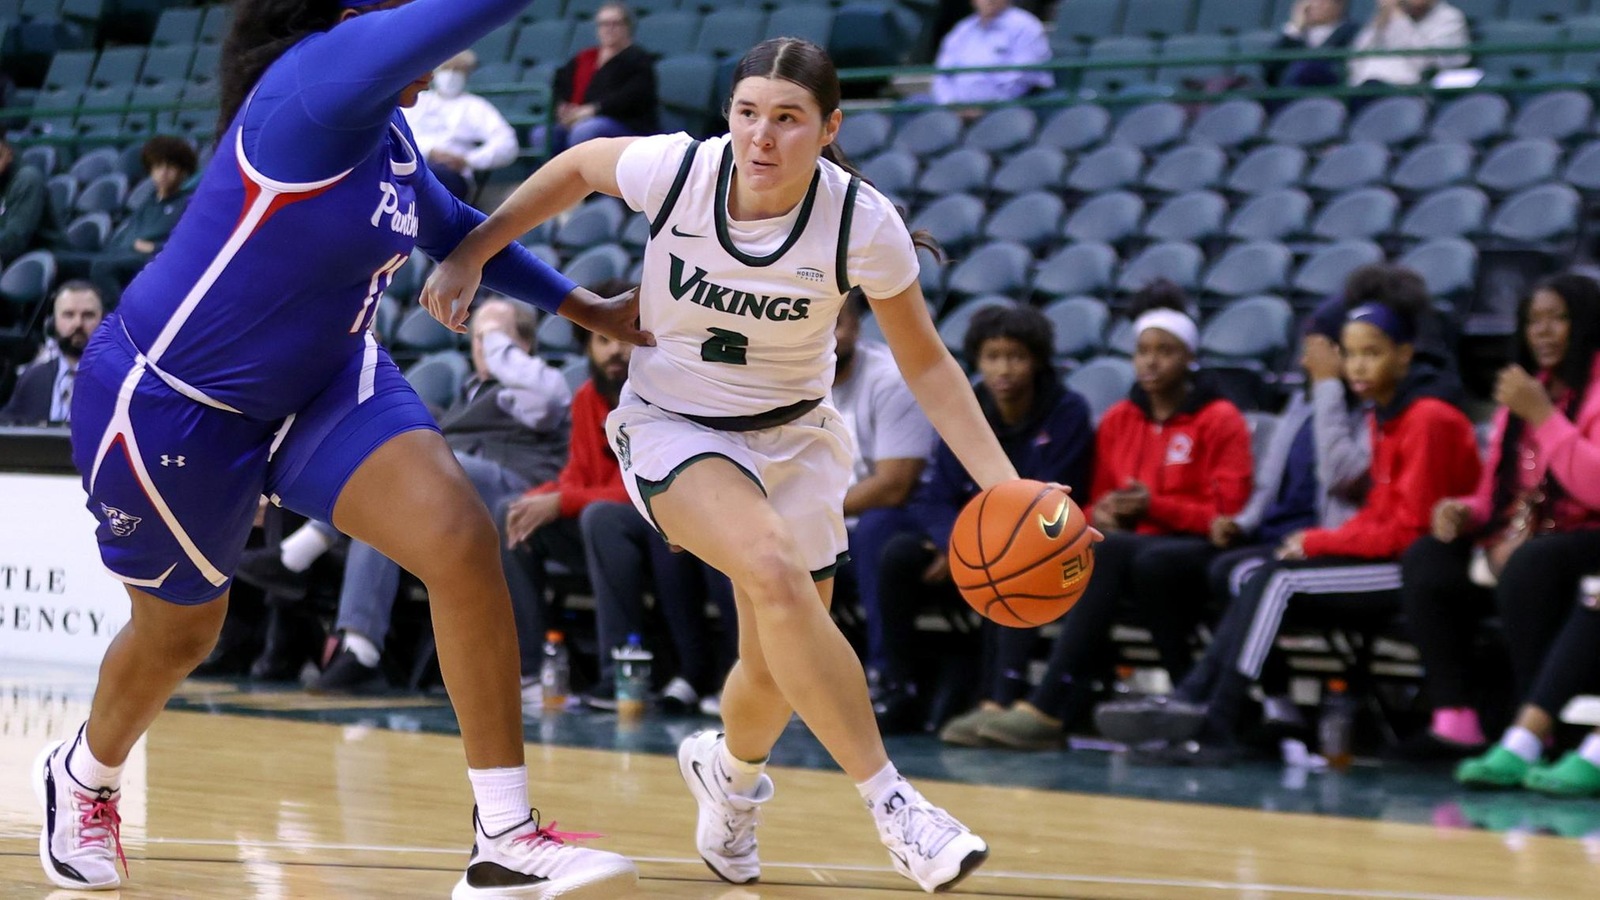 Cleveland State Women’s Basketball Notches 57-53 Victory Over Georgia State